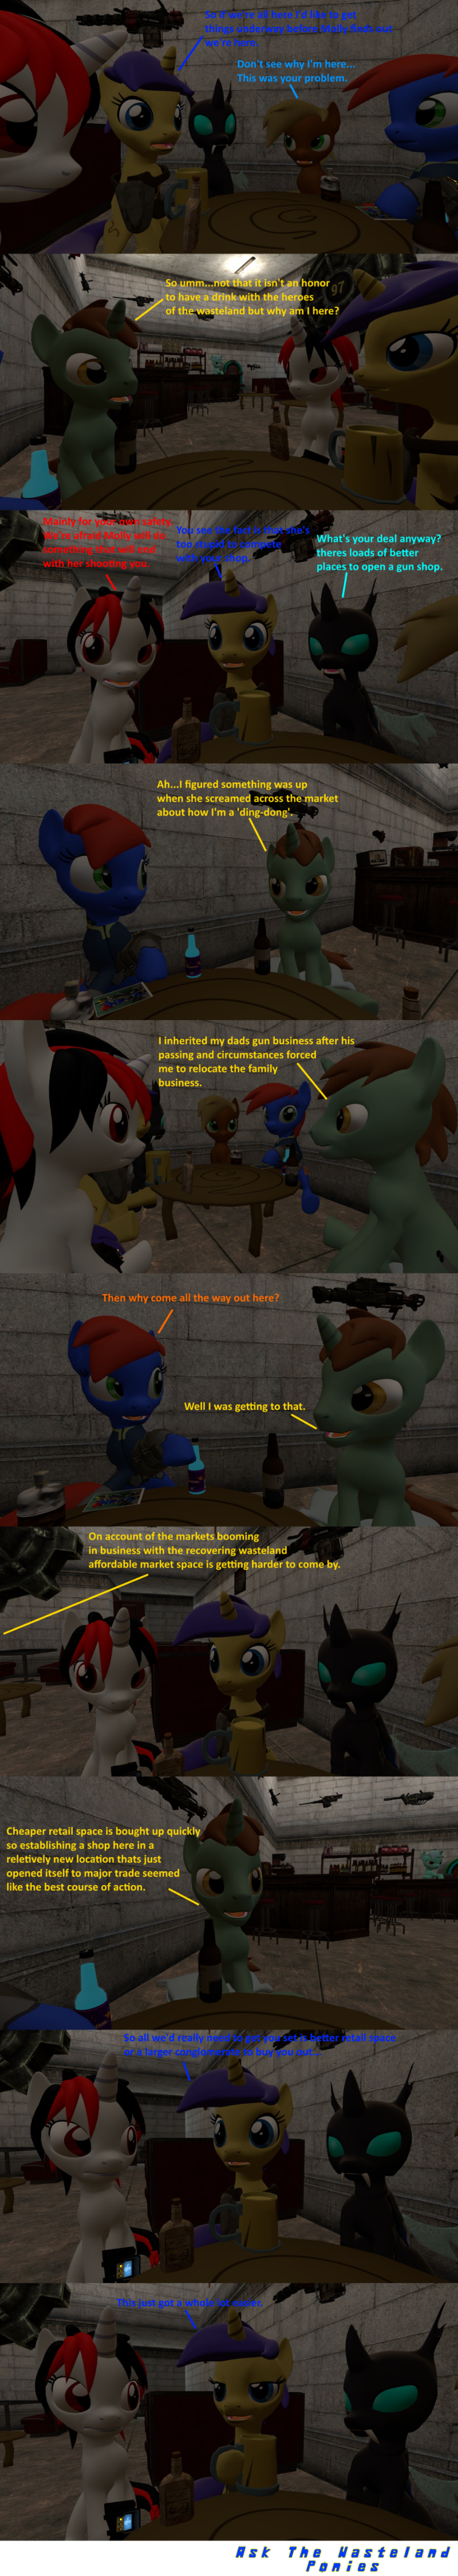 Page 47 [Competiton] [PART 8]